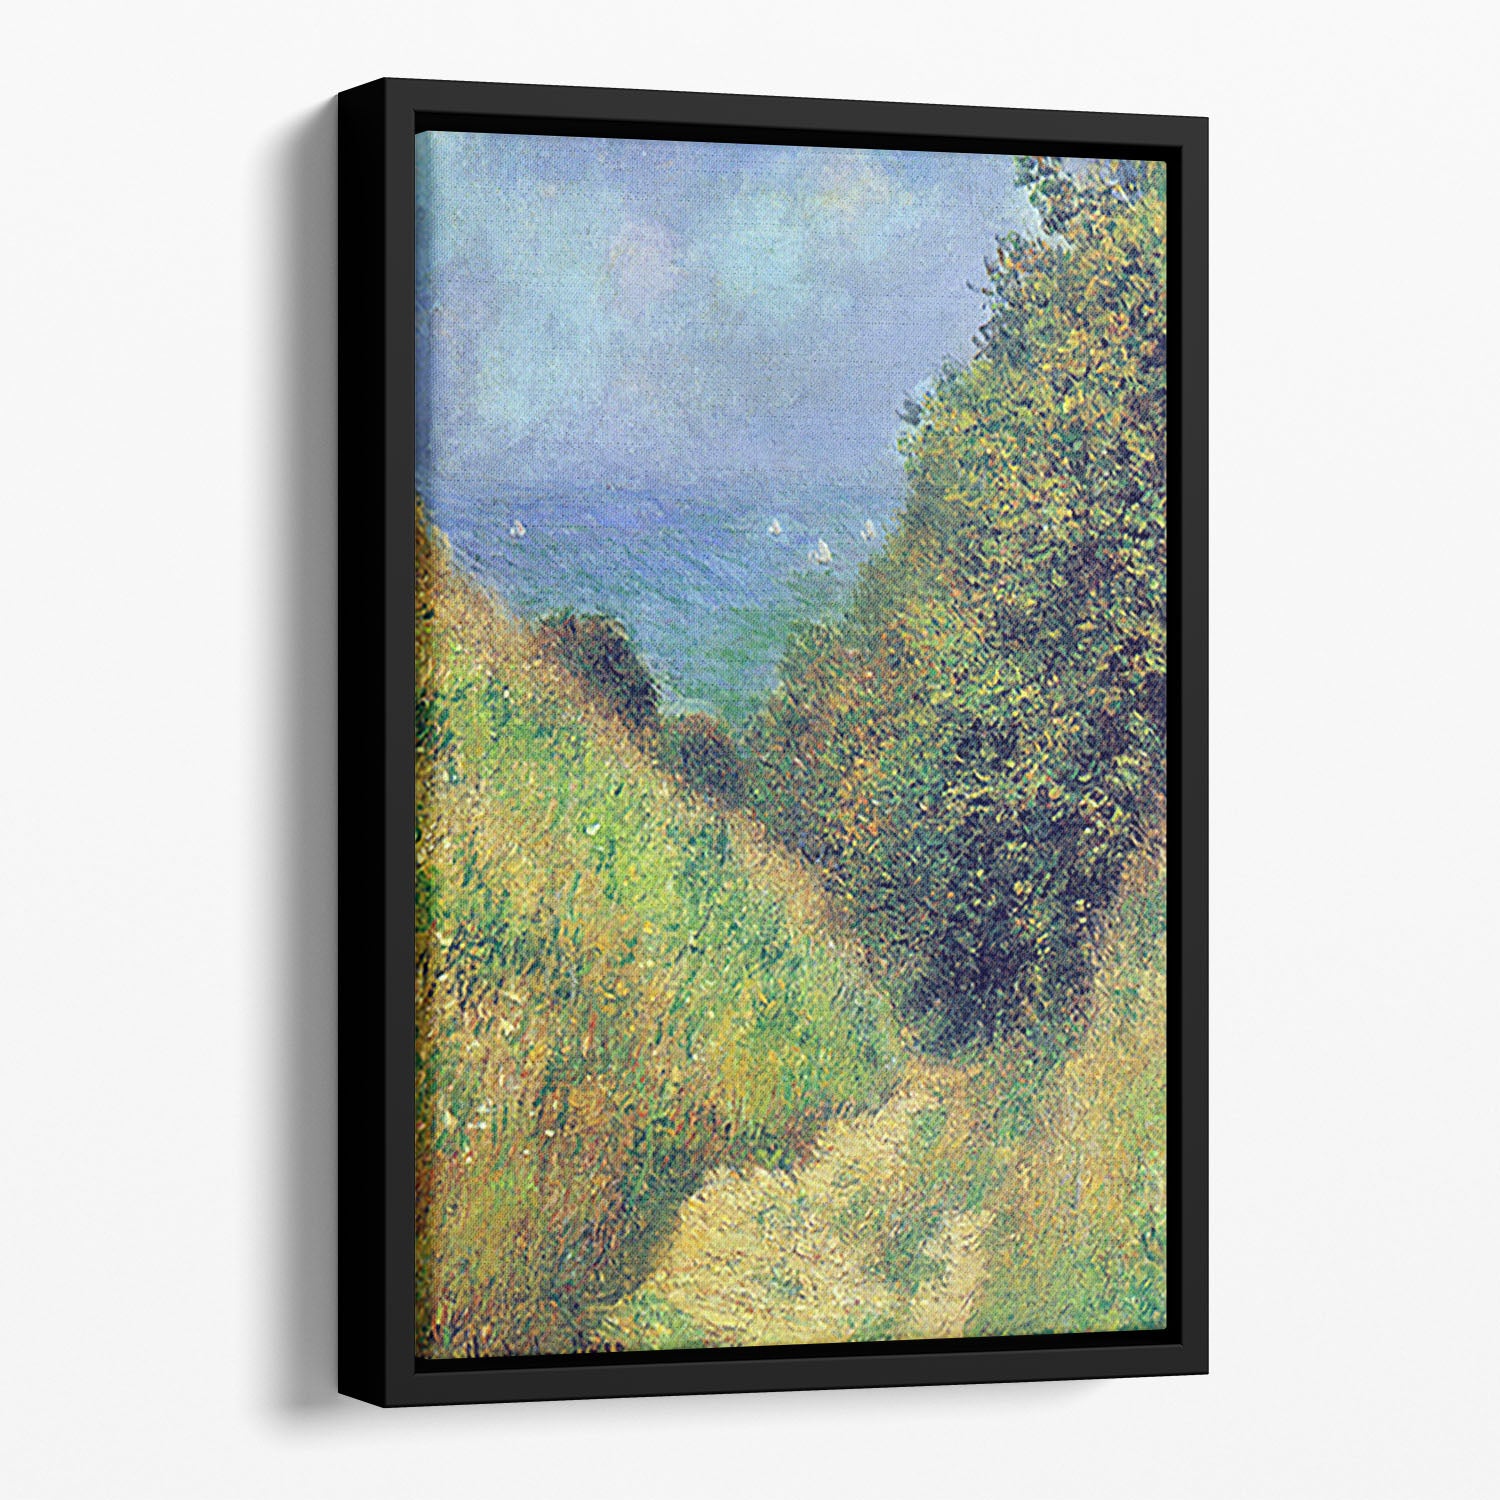 Pourville 2 by Monet Floating Framed Canvas